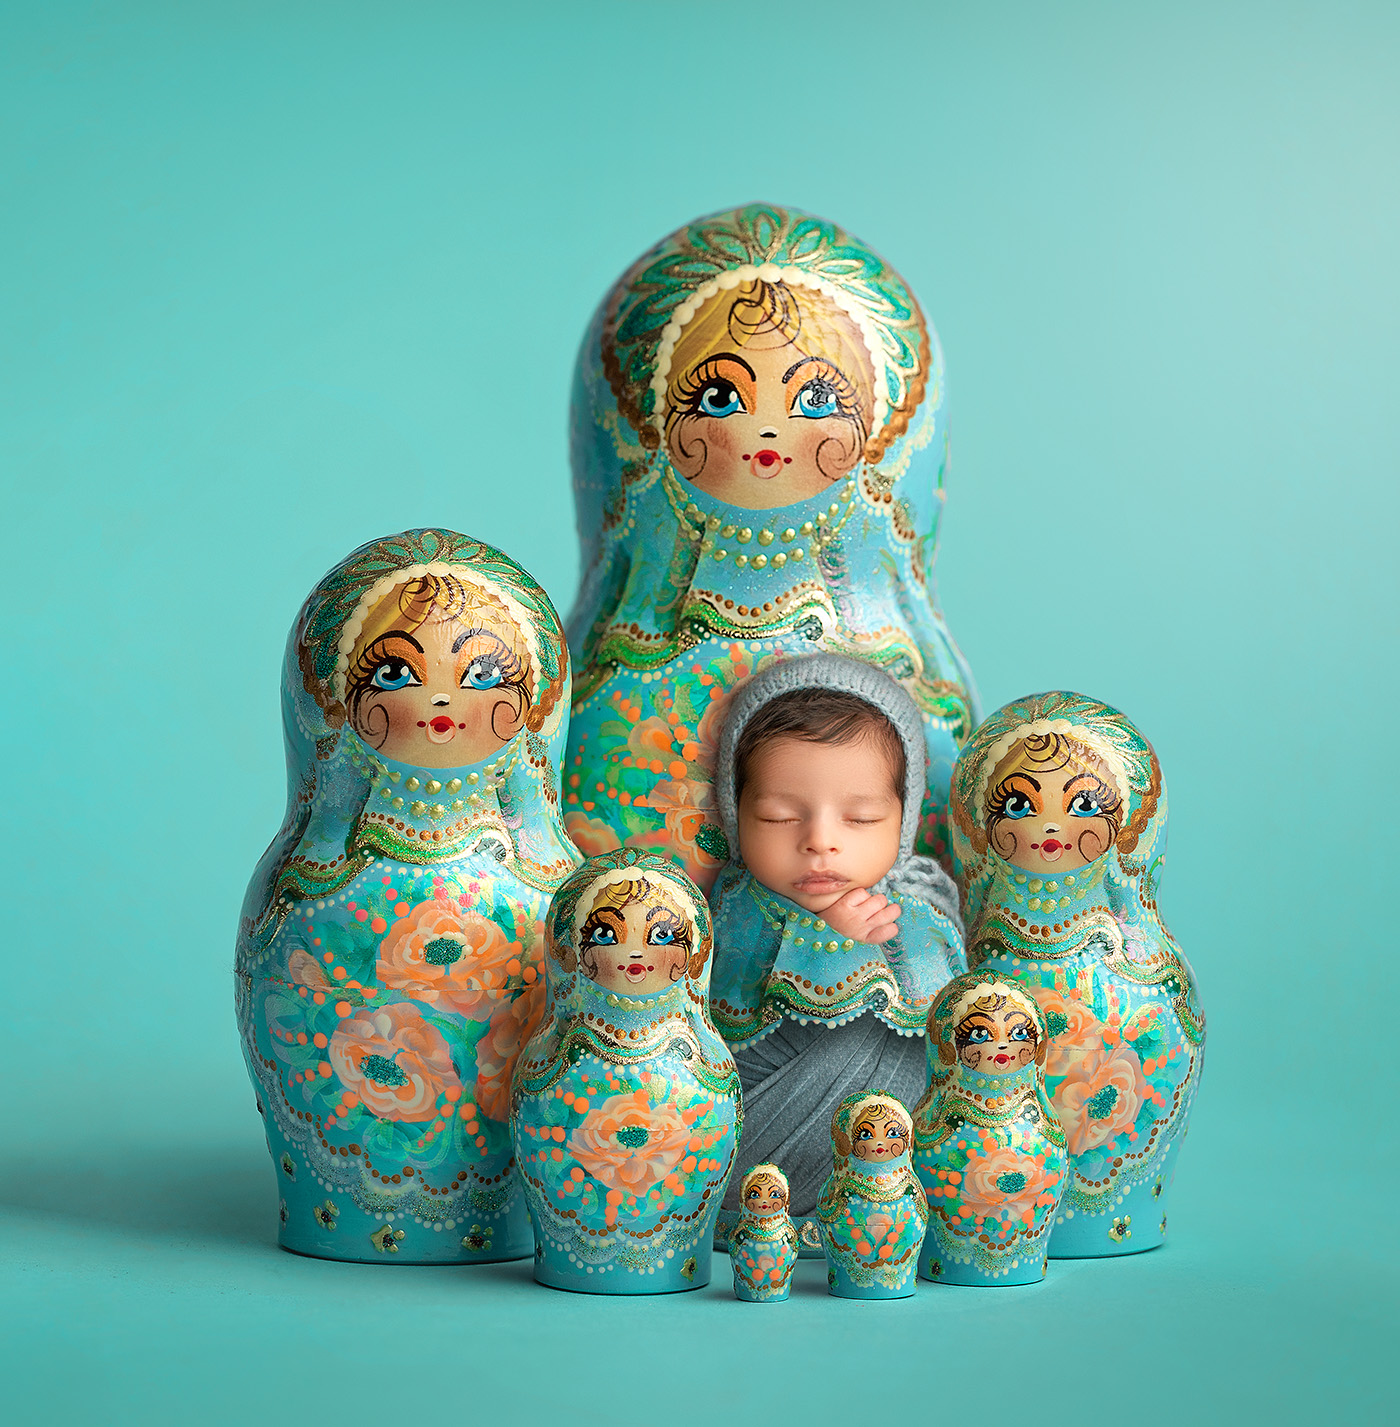 Newborn dressed as Russian doll surrounded by Russian dolls.